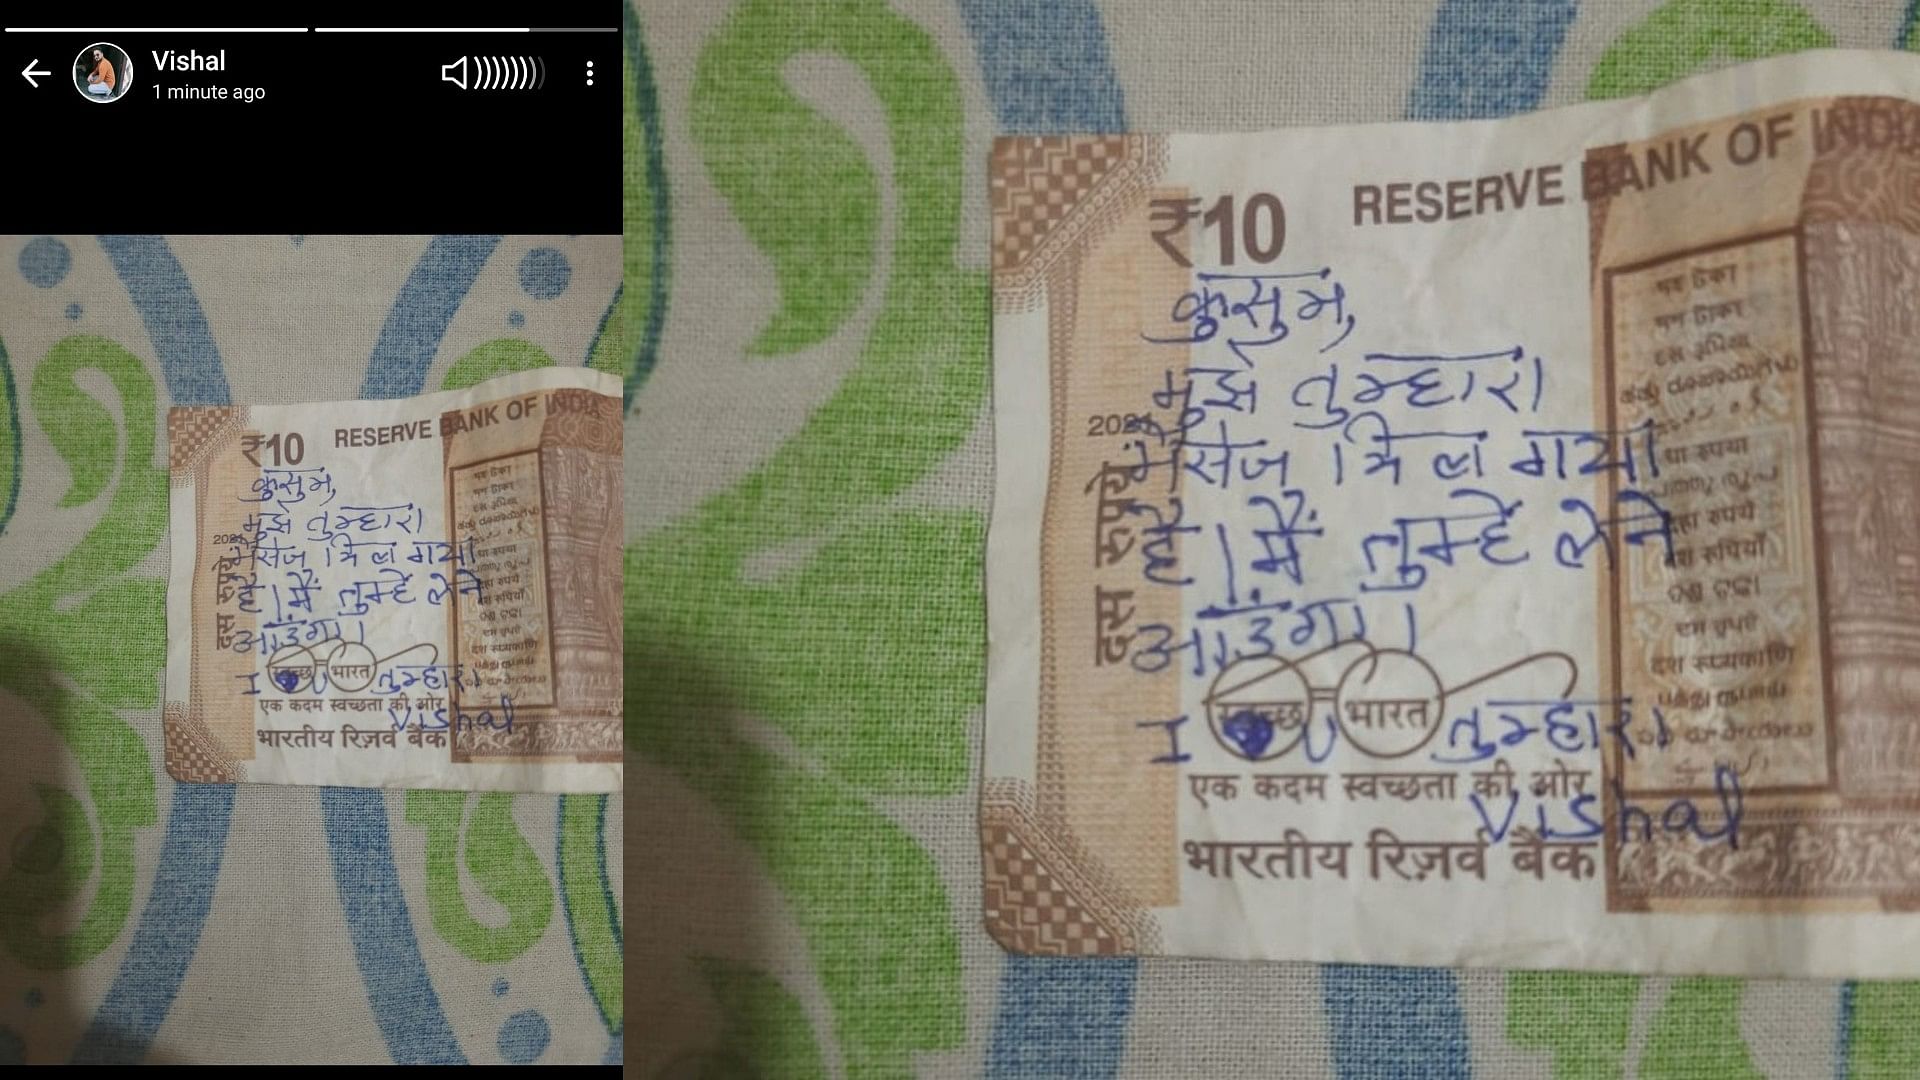 Vishal replied on Kusums message Written on ten rupee note I will come to pick you up